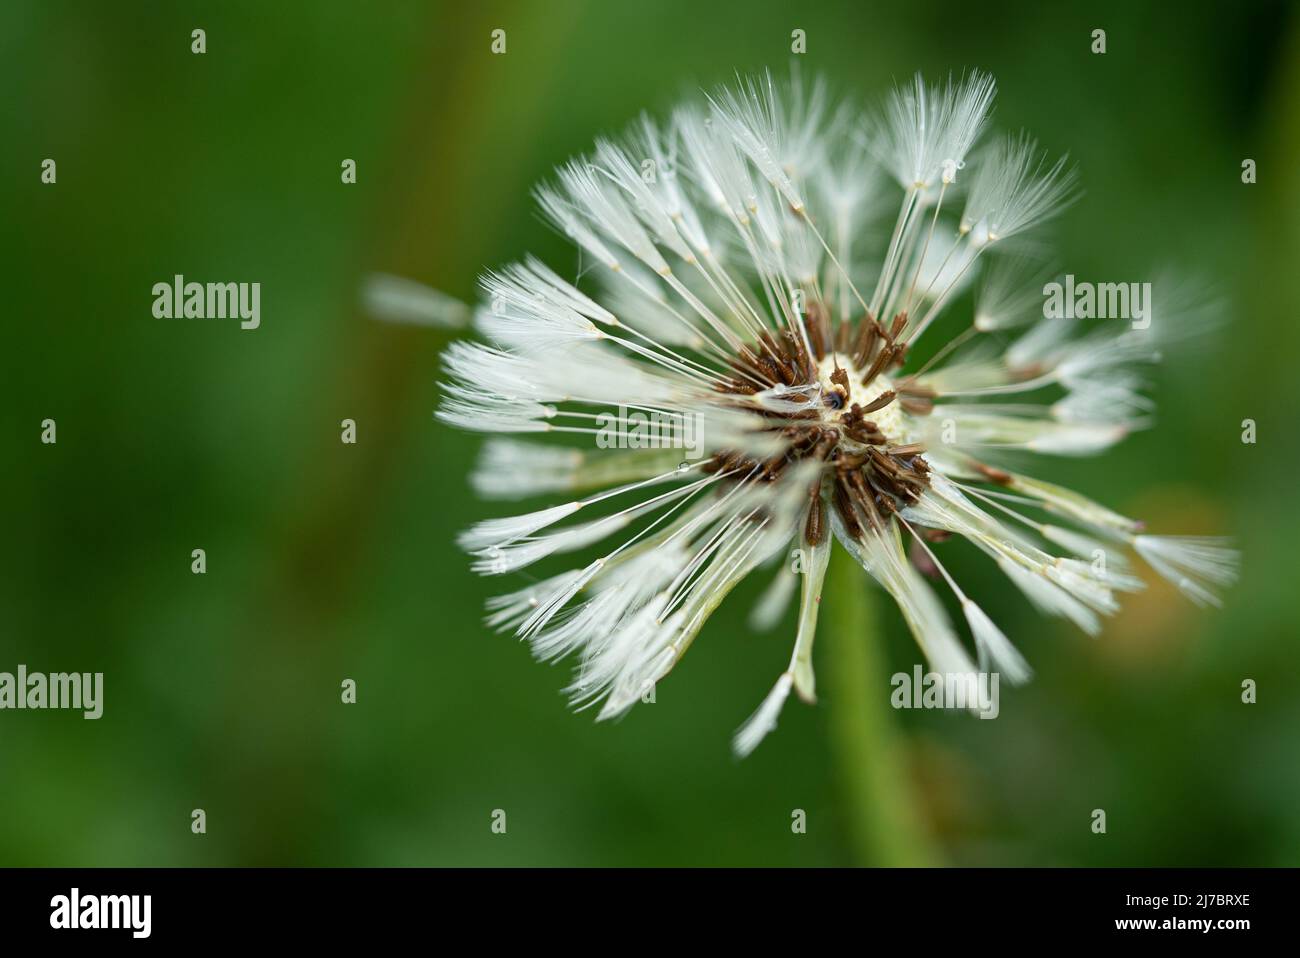 After the rain: Wet blowball Stock Photo